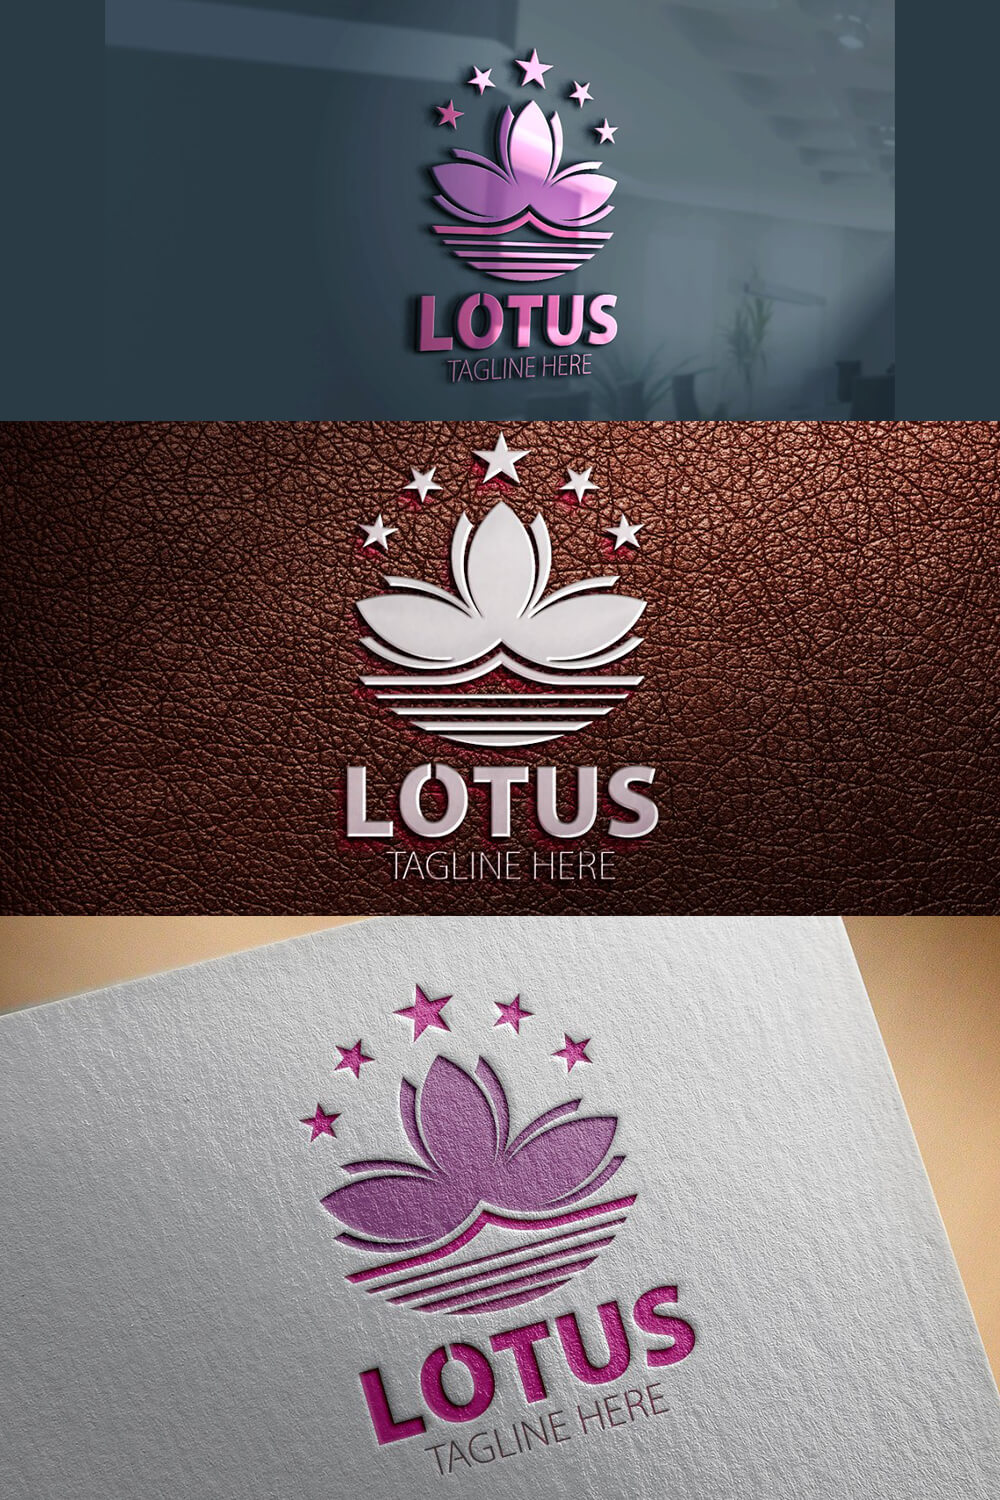 Three lotus flower logos: purple on a blue wall, gray on brown leather, purple on gray paper.